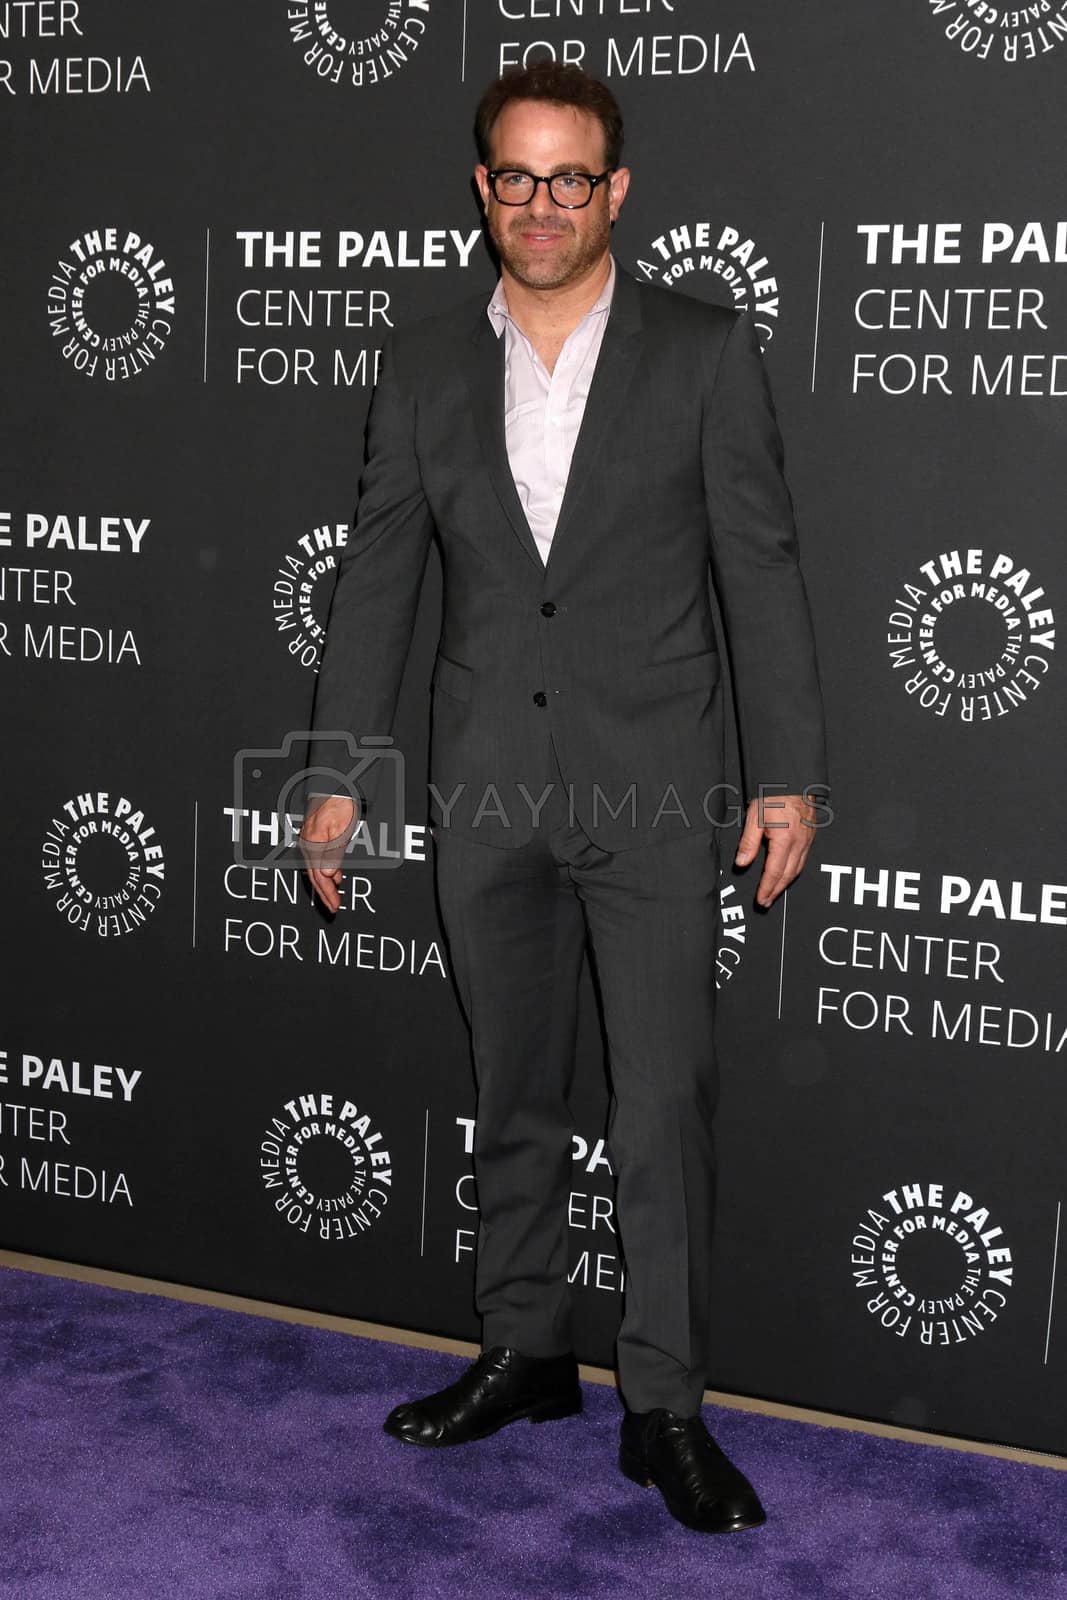 Royalty free image of Paul Adelstein
at the "Prison Break" 2017 PaleyLive LA Spring Season, Paley Center for Media, Beverly Hills, CA 03-29-17/ImageCollect by ImageCollect